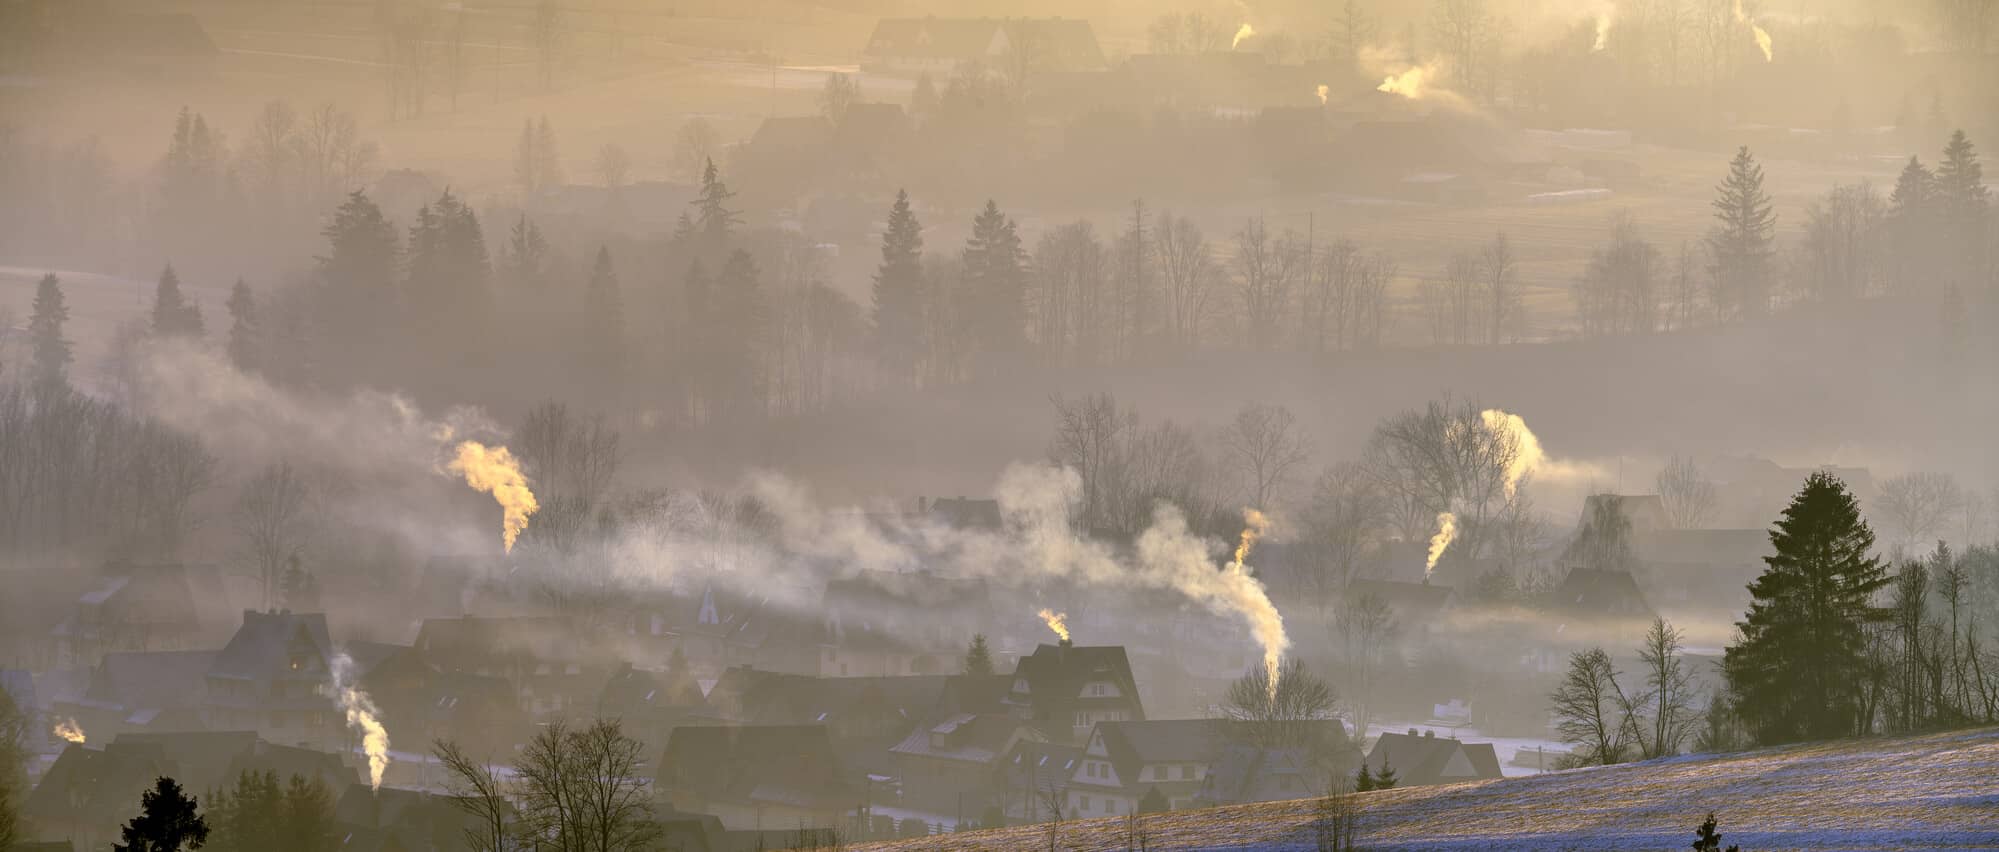 A village in Poland is covered in smog caused by the use of coal stoves. Aerosols. Photo: depositphotos.com